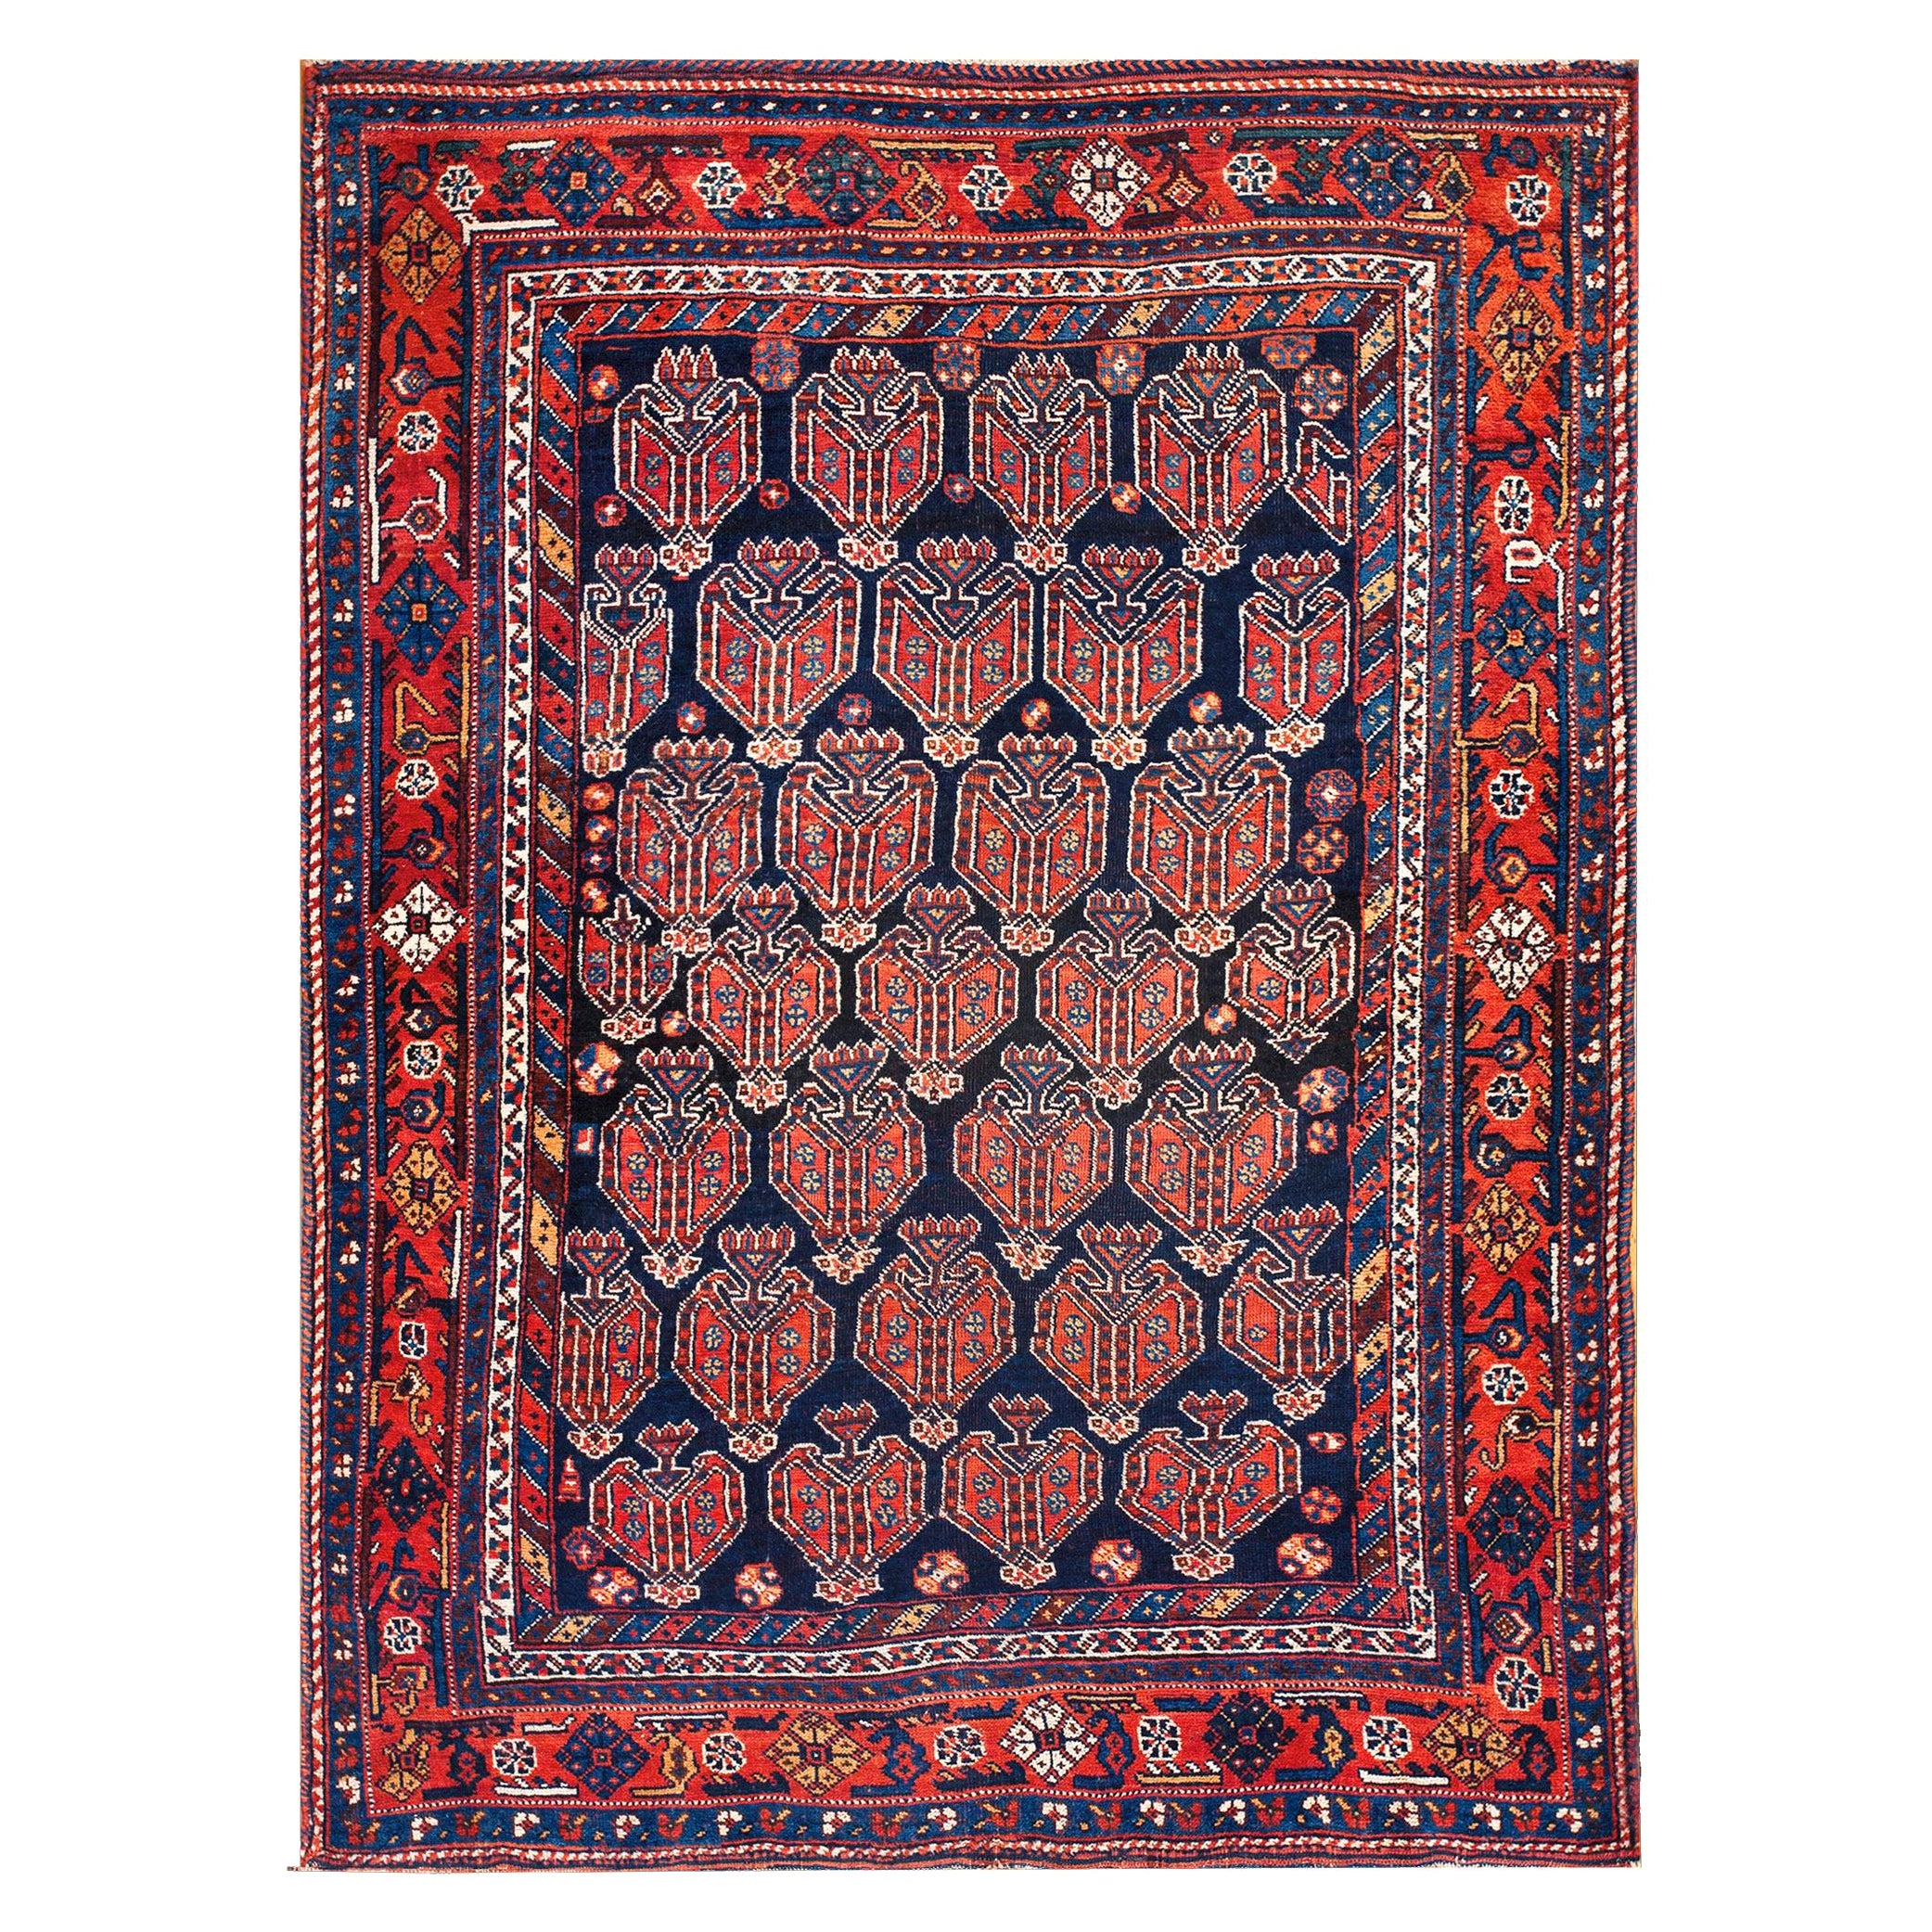 Early 20th Century Persian Afshar Carpet ( 4' 5" x 5' 10" - 135 x 178 cm ) For Sale